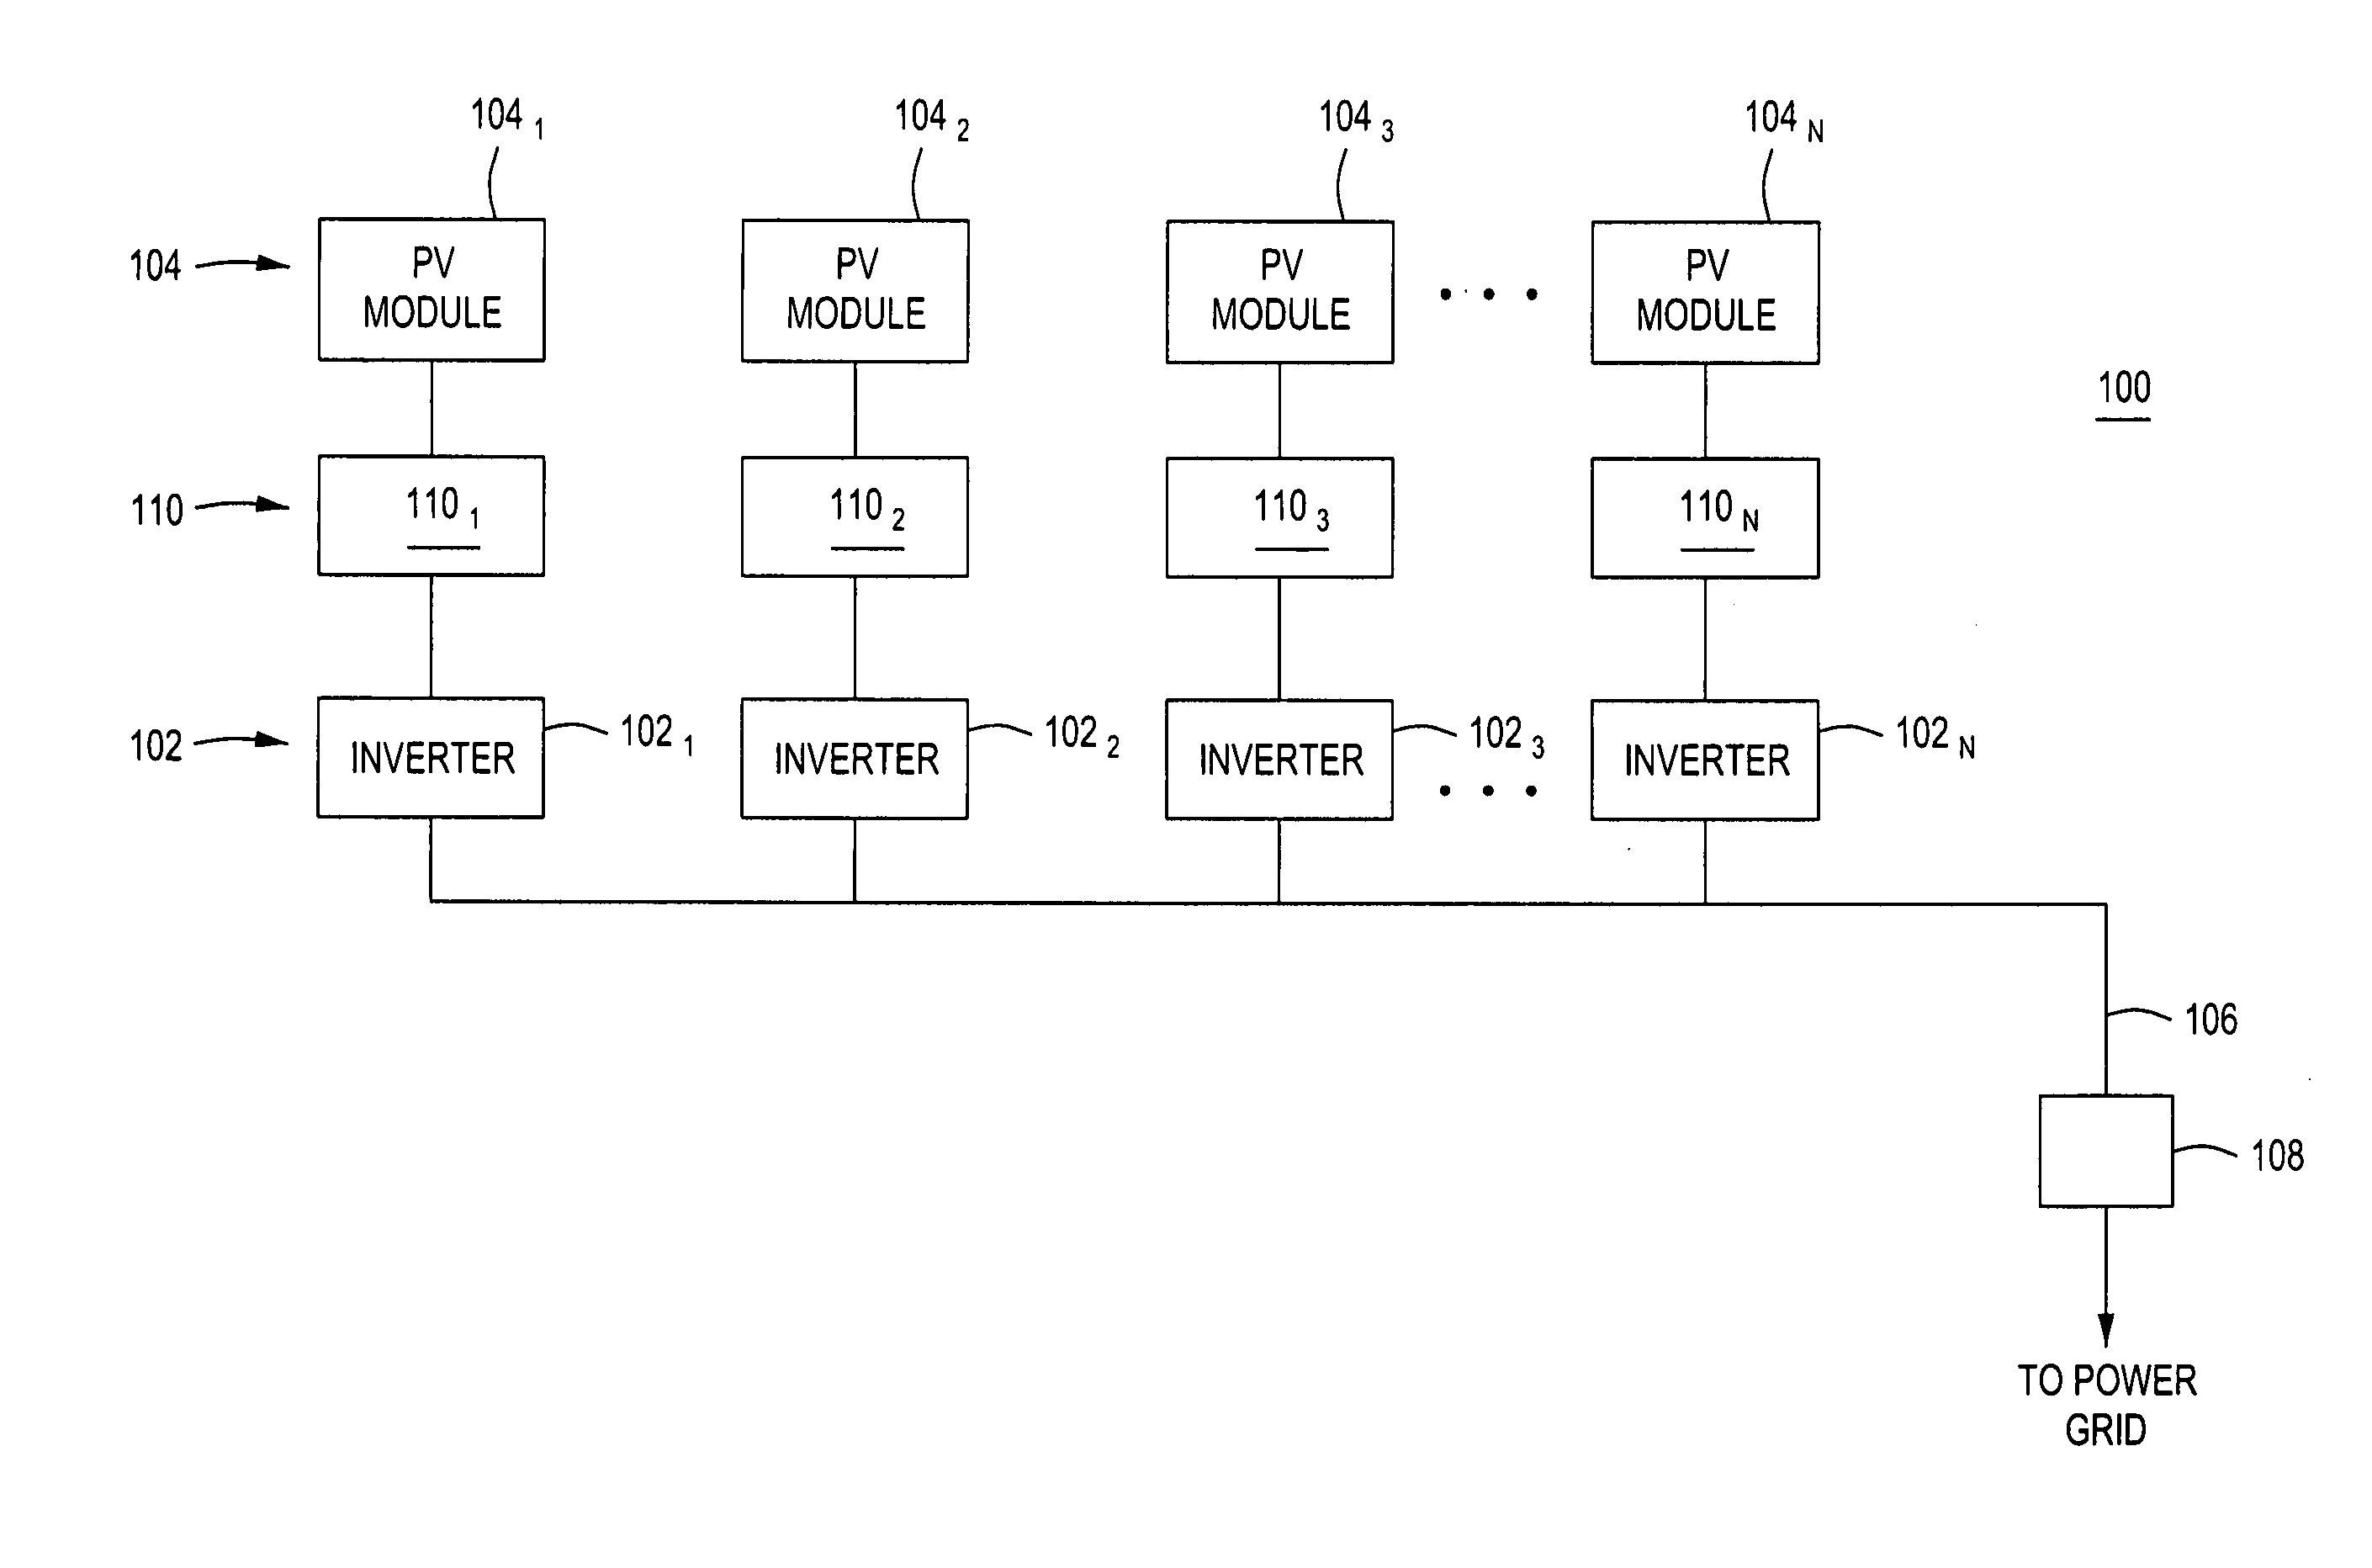 Apparatus for coupling power generated by a photovoltaic module to an output